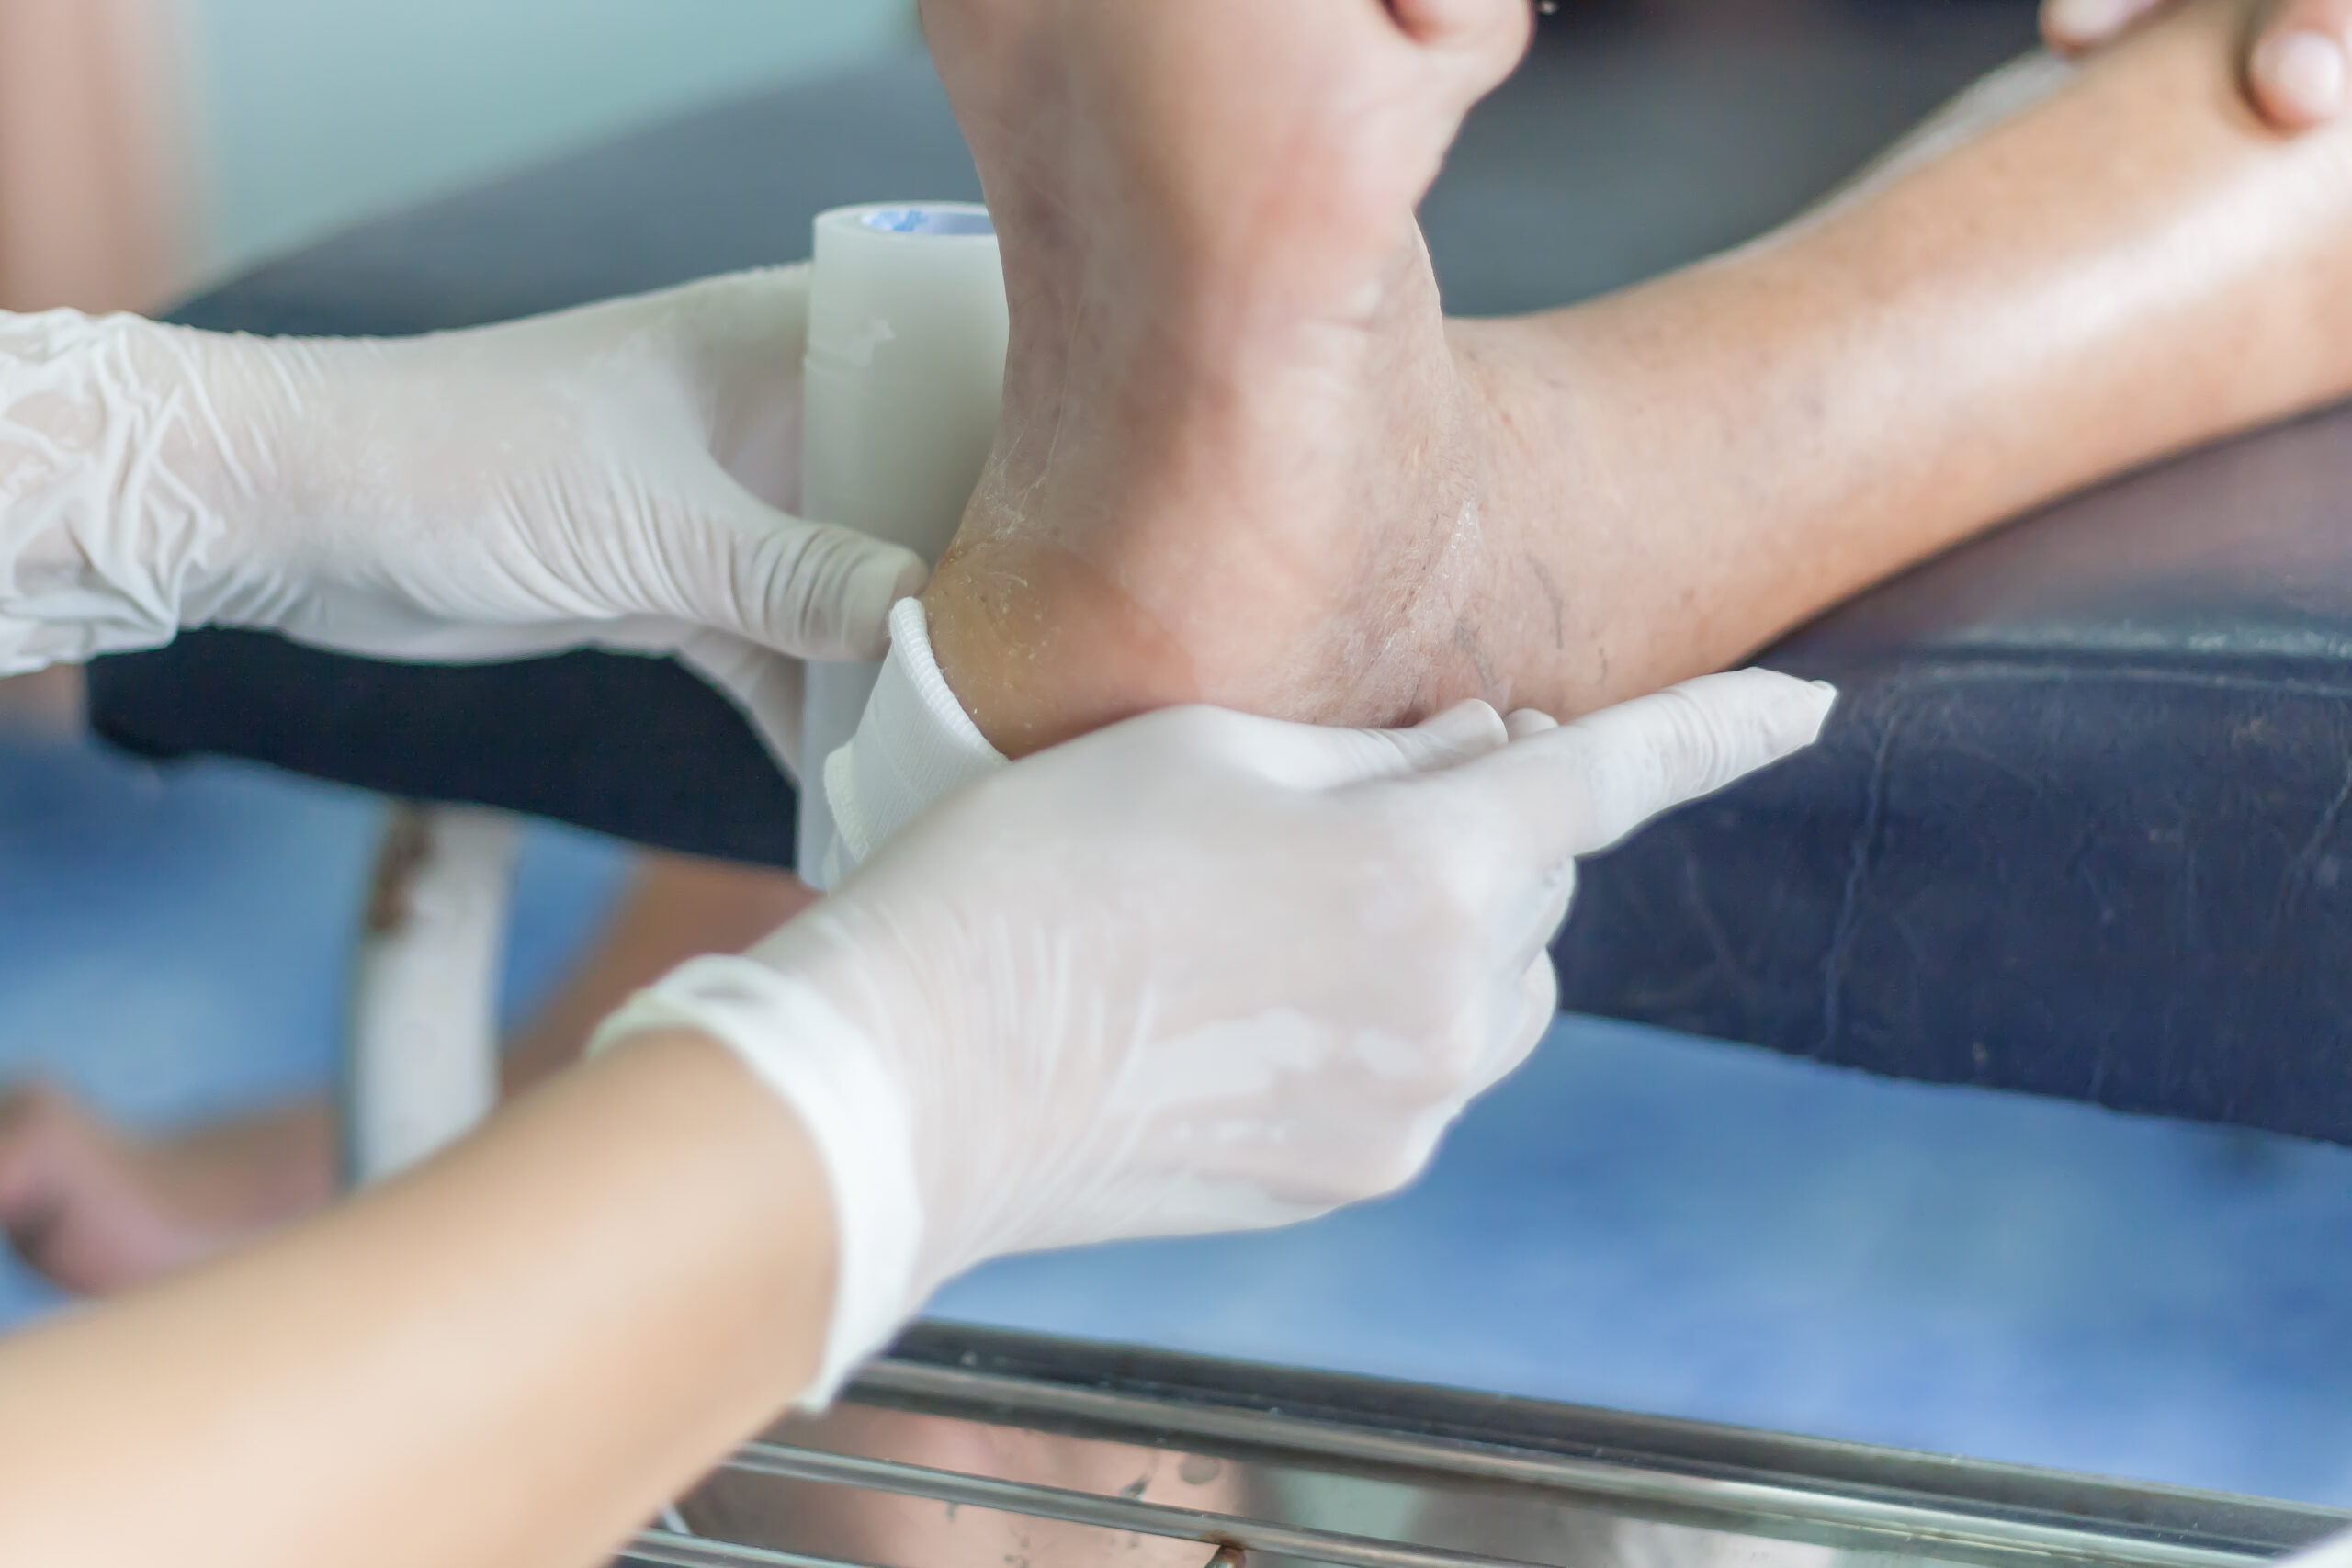 diabetes ulcers,treatment infected wound of diabetic foot